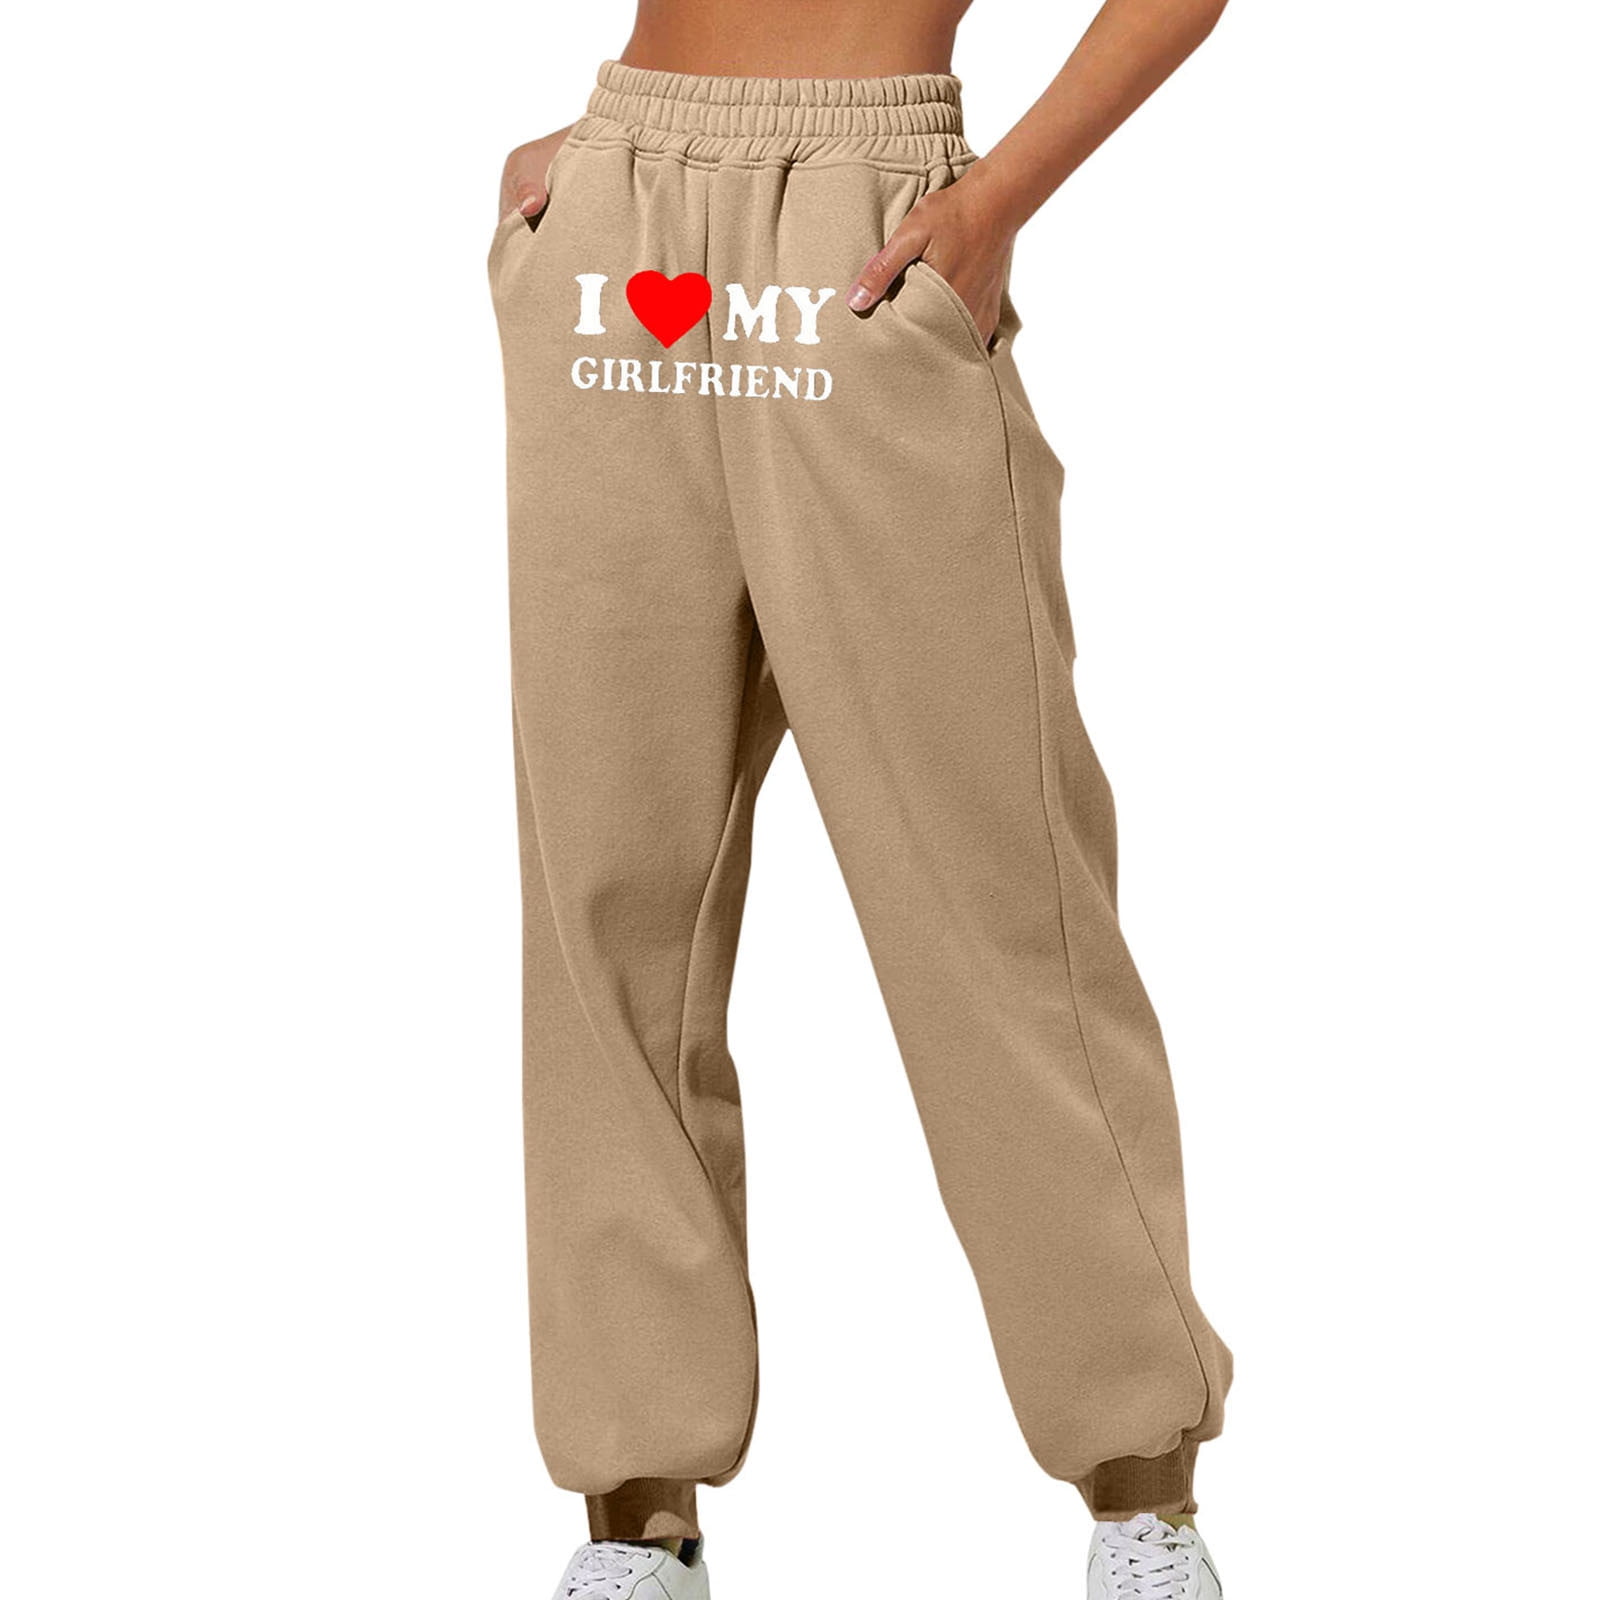 ZQGJB I Heart My Girlfriend Sweatpants for Women Loose Comfy Baggy ...